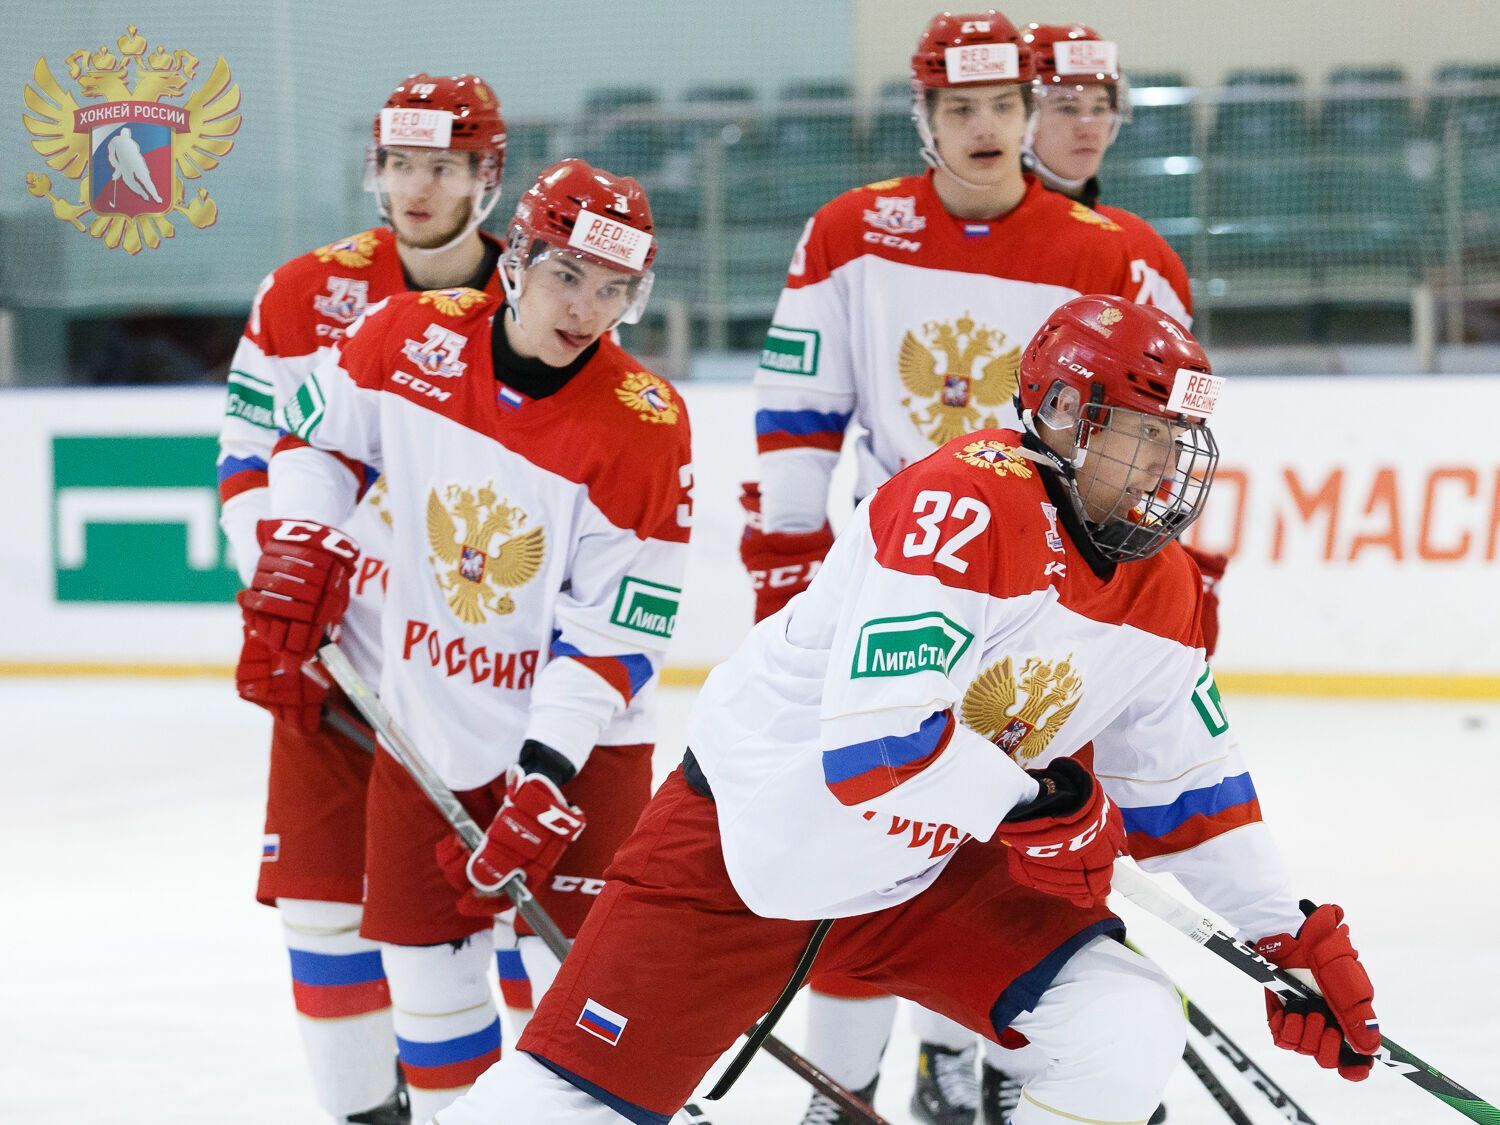 Russia says its national team was ''robbed of gold medals'' at the World Cup, where it did not even play